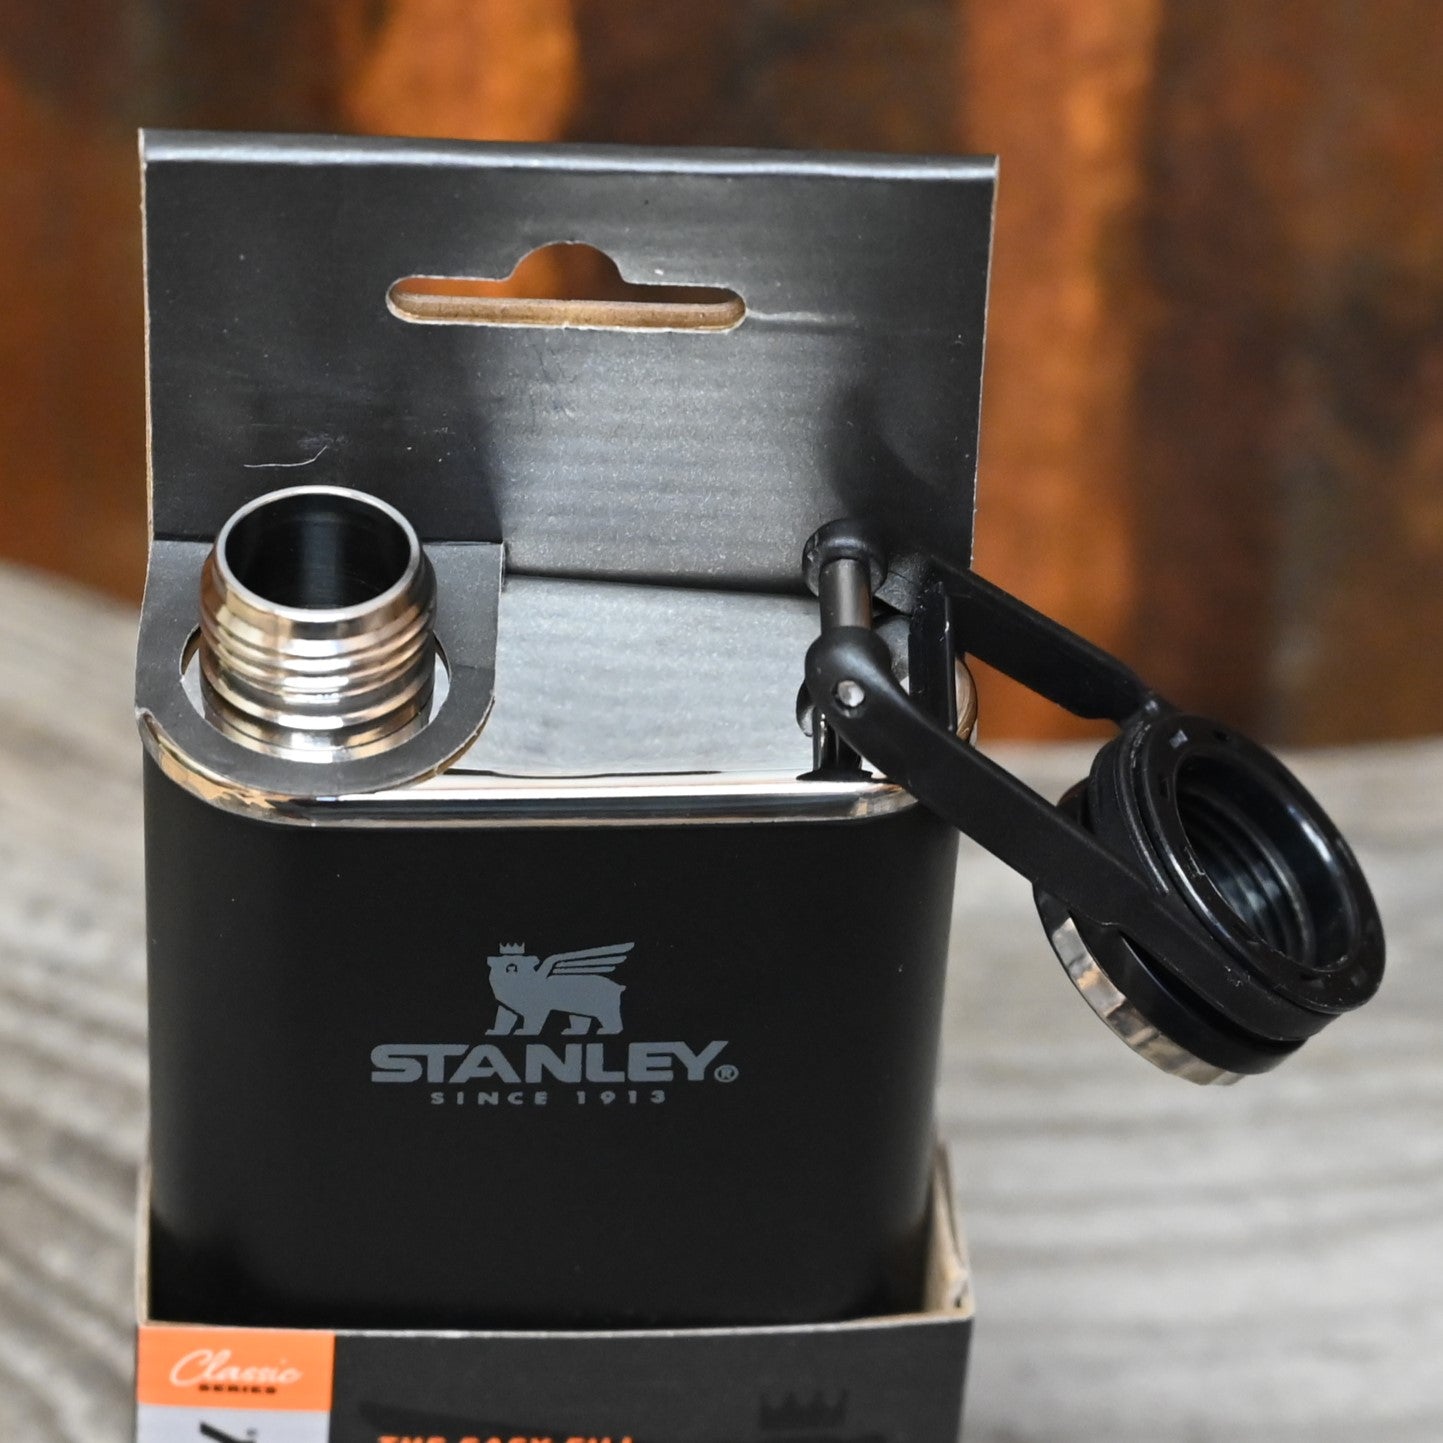 Stanley Easy Fill Wide Mouth Flask in Matte Black view of mouthpiece